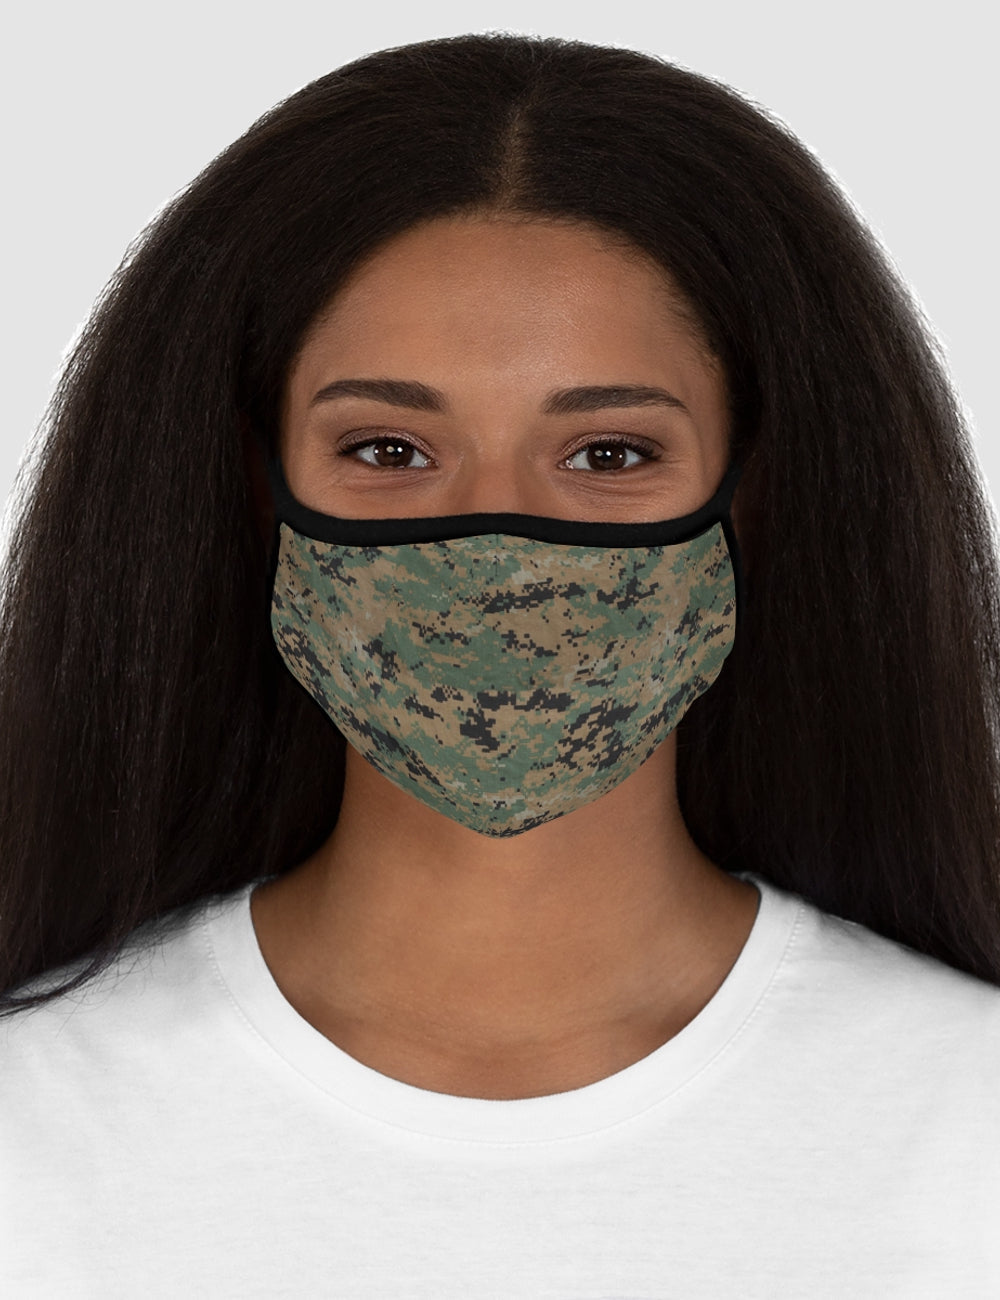 MARPAT Digital Woodland Camouflage Print Fitted Double Layered Polyester Face Mask OniTakai